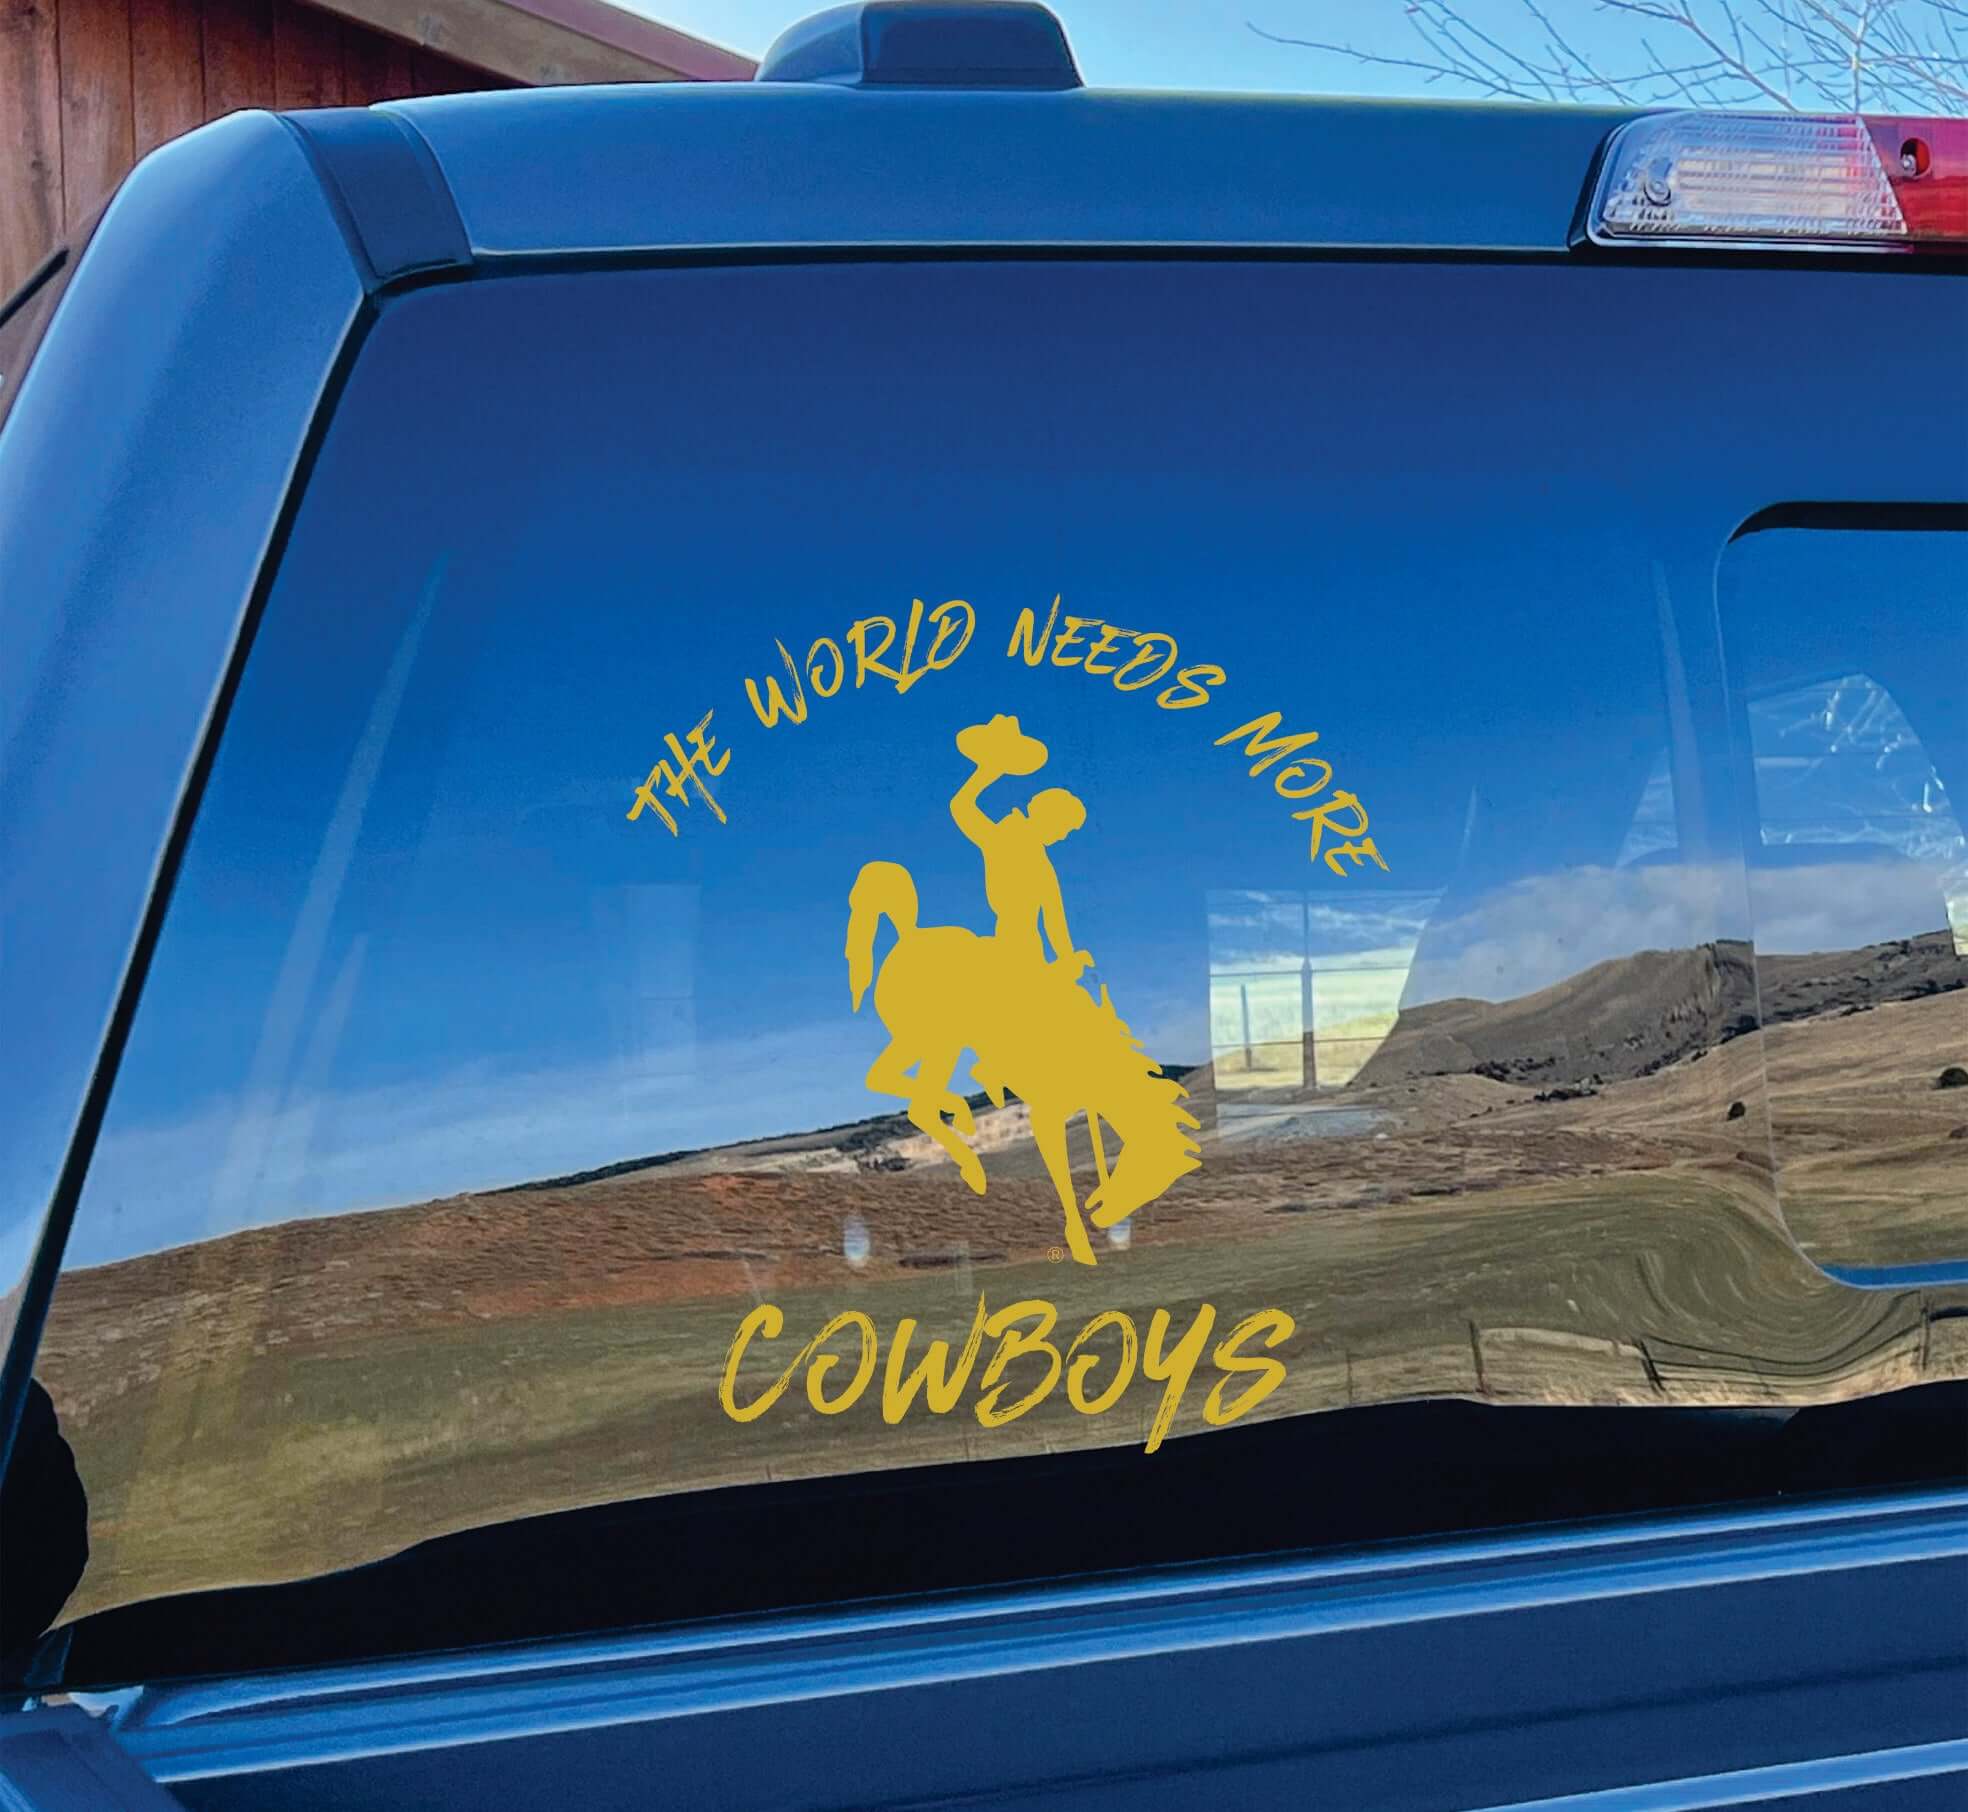 Photo of gold vinyl decal "World Needs More Cowboys" on car window